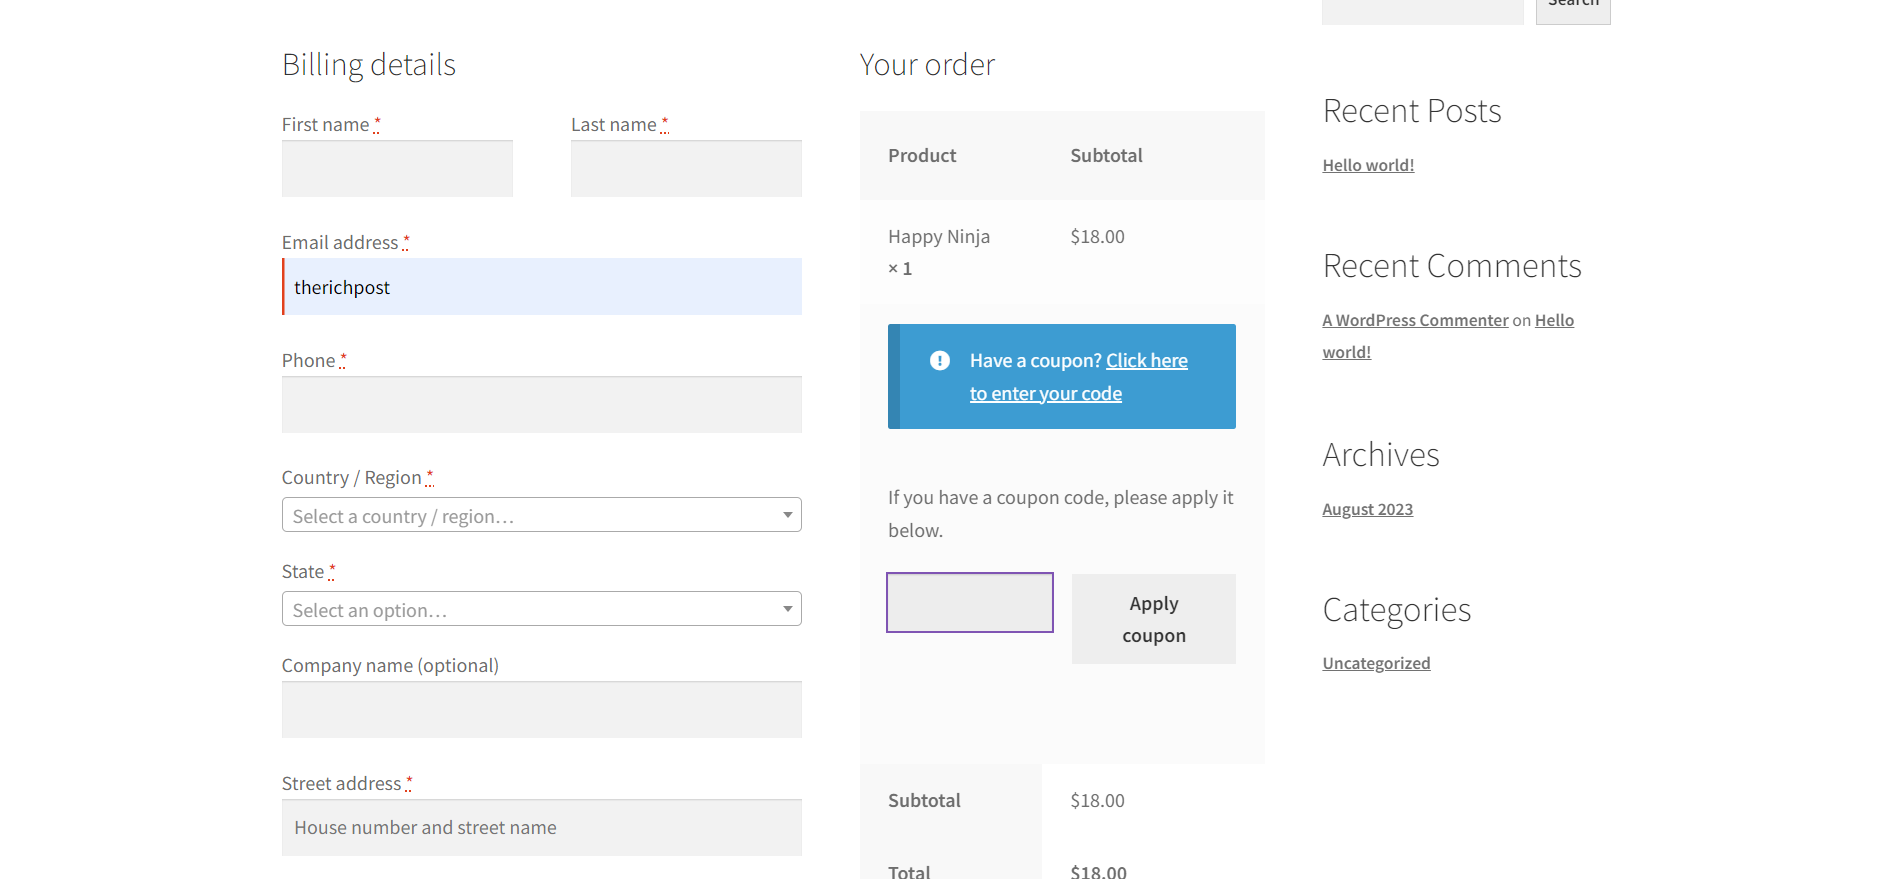 How to Move coupon form before subtotal in WooCommerce checkout?